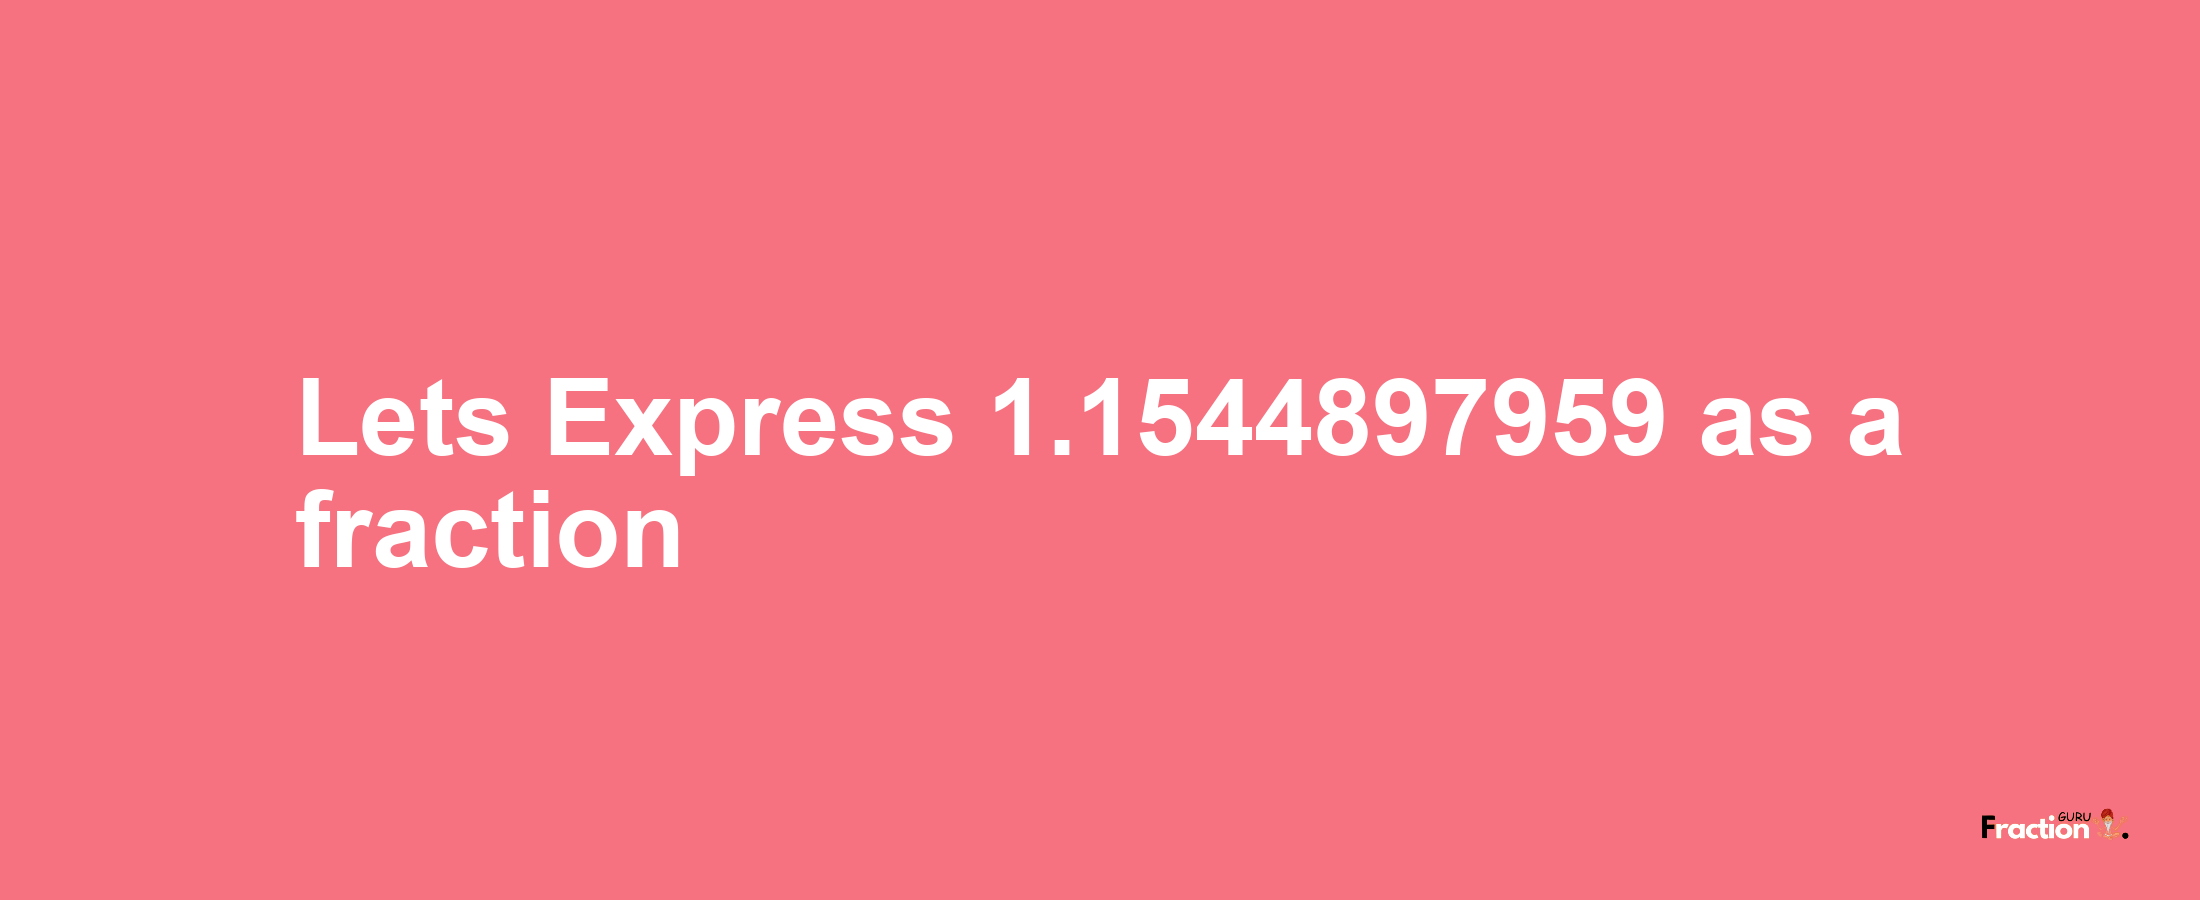 Lets Express 1.1544897959 as afraction